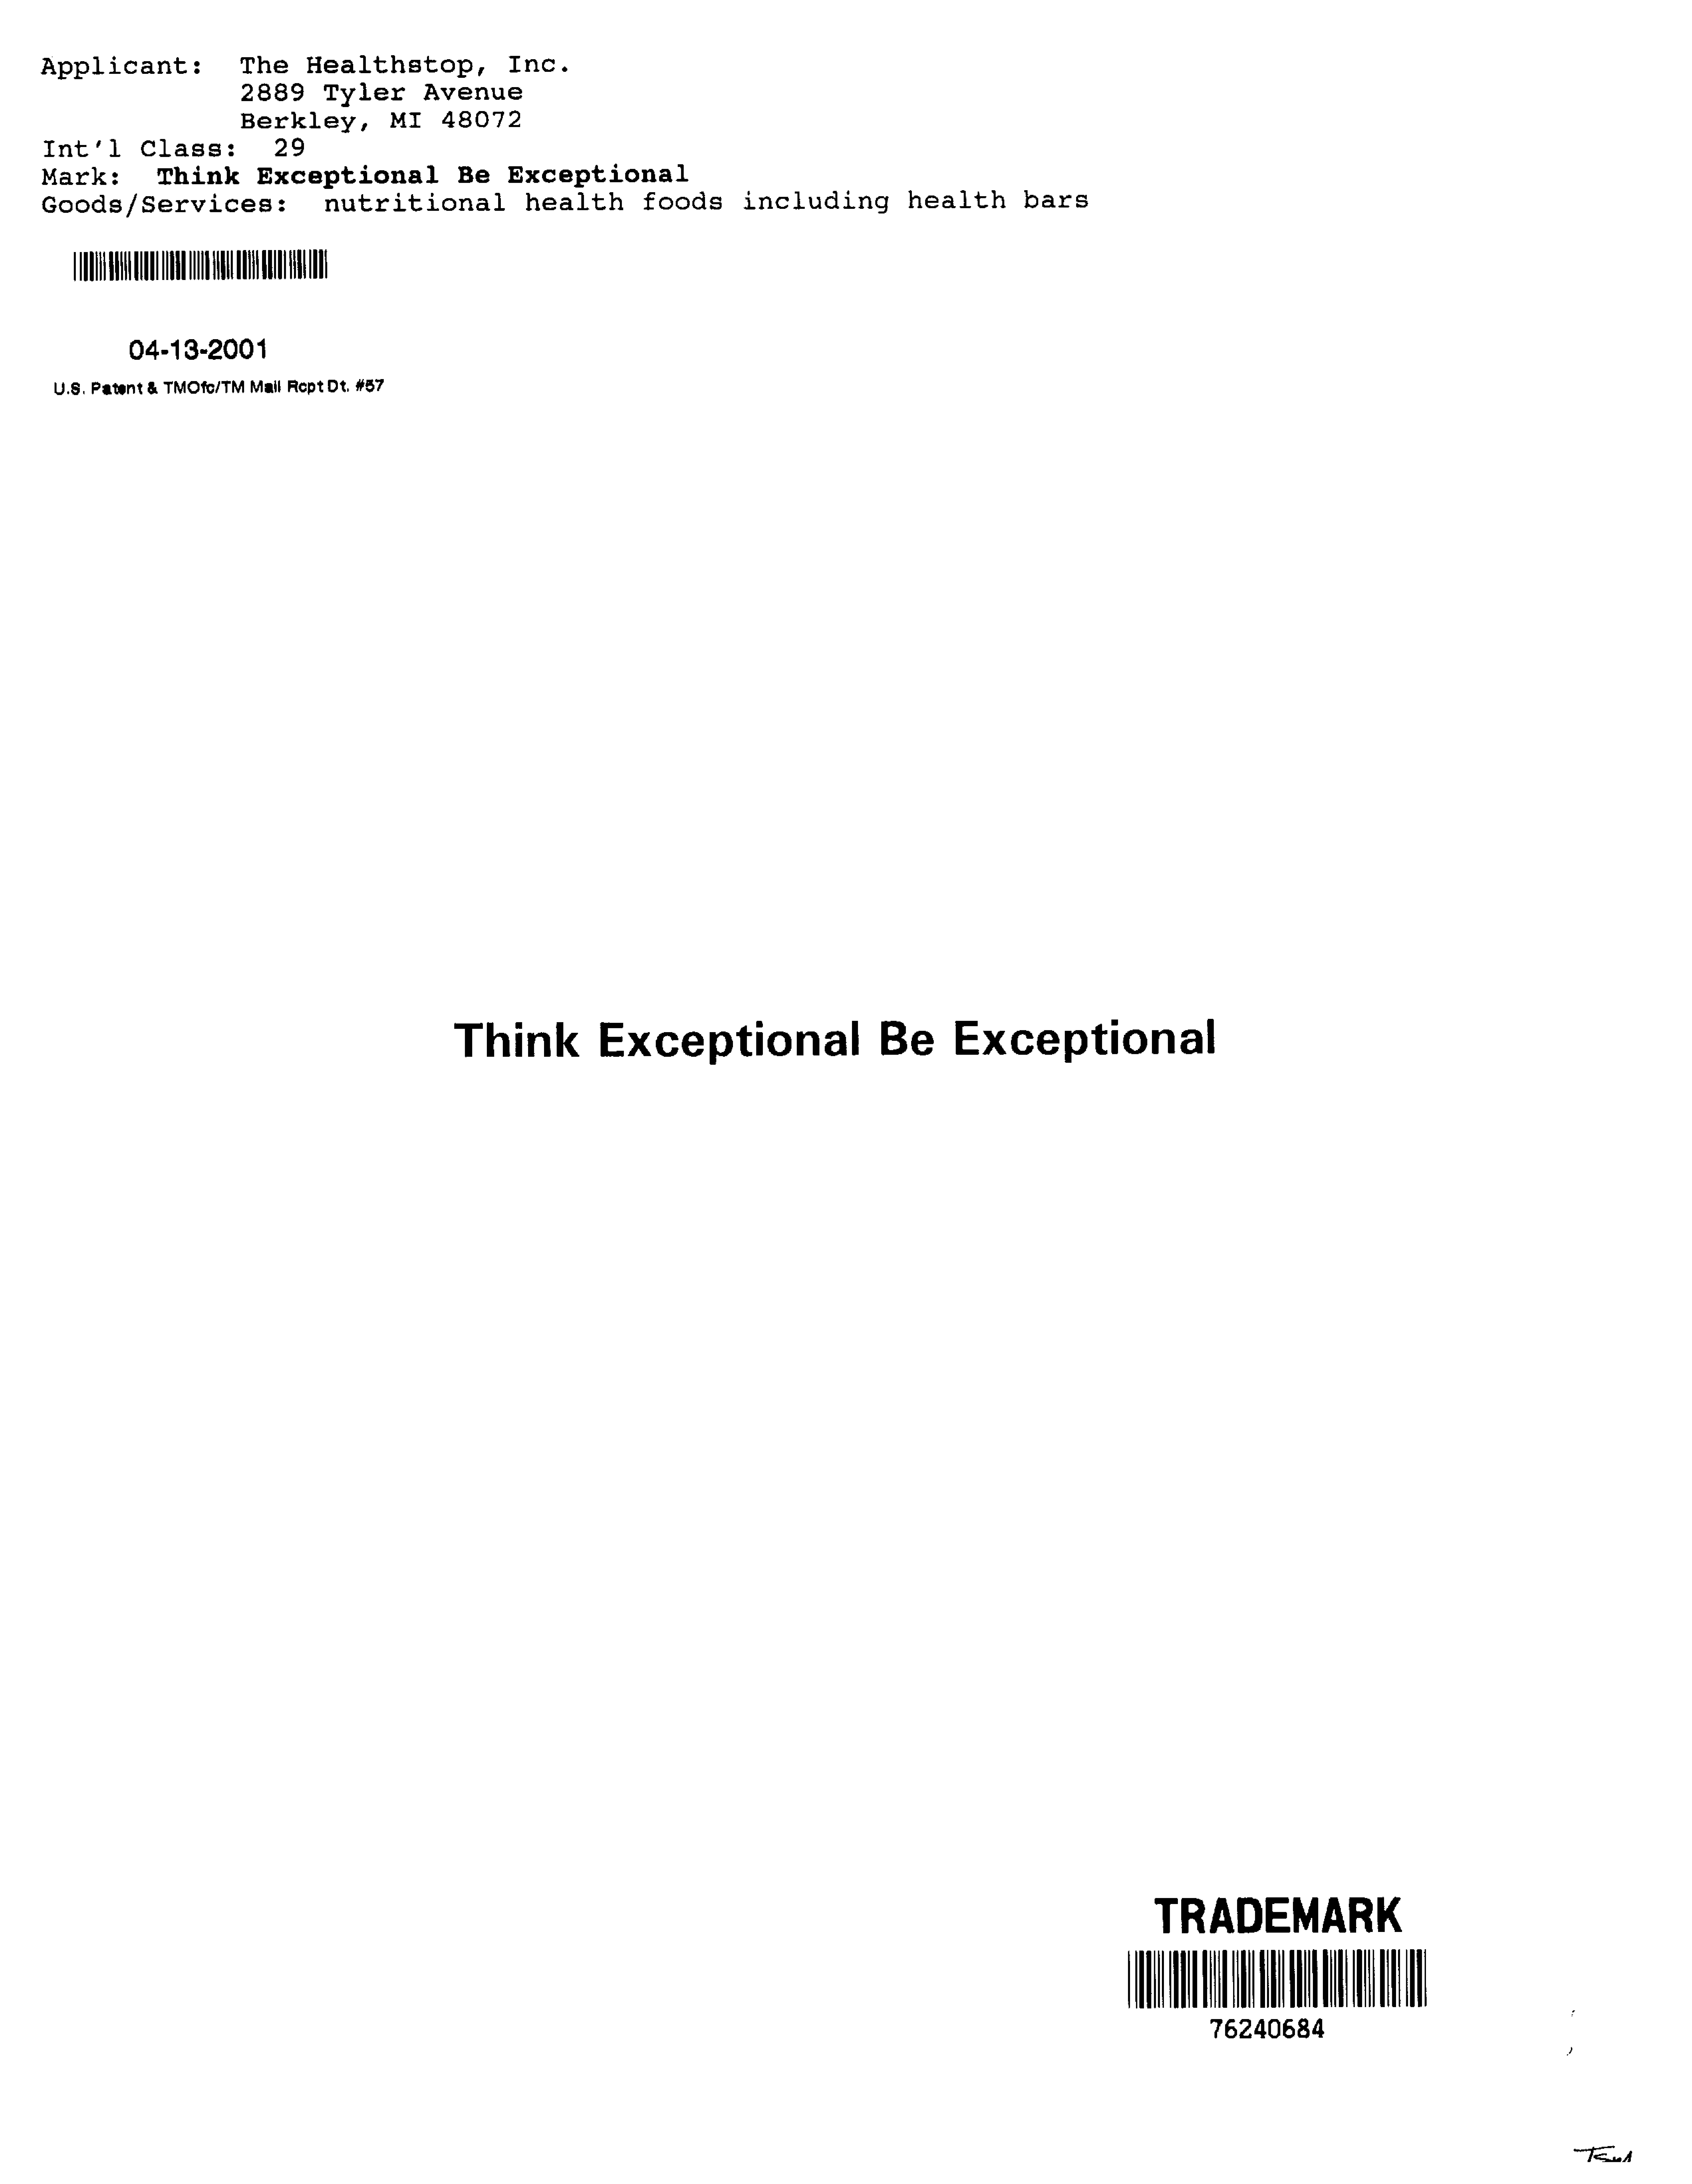  THINK EXCEPTIONAL BE EXCEPTIONAL